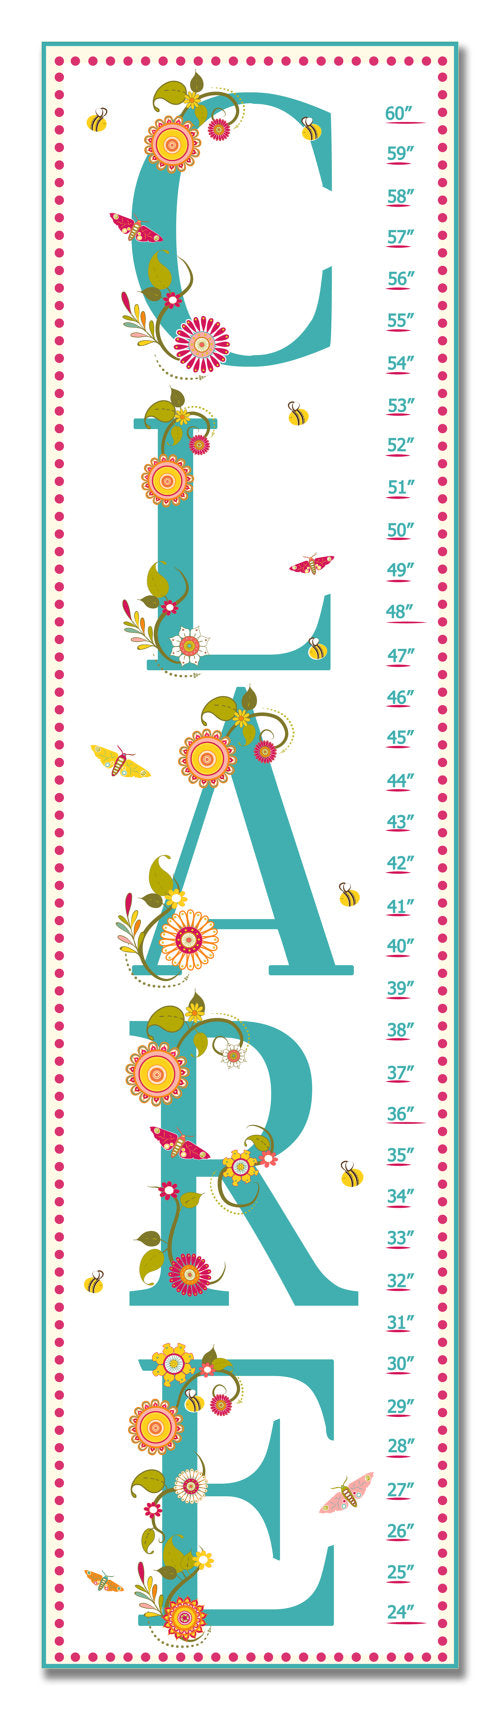 Name Personalized Growth Chart - Nursery Decor - Baby Shower Gifts